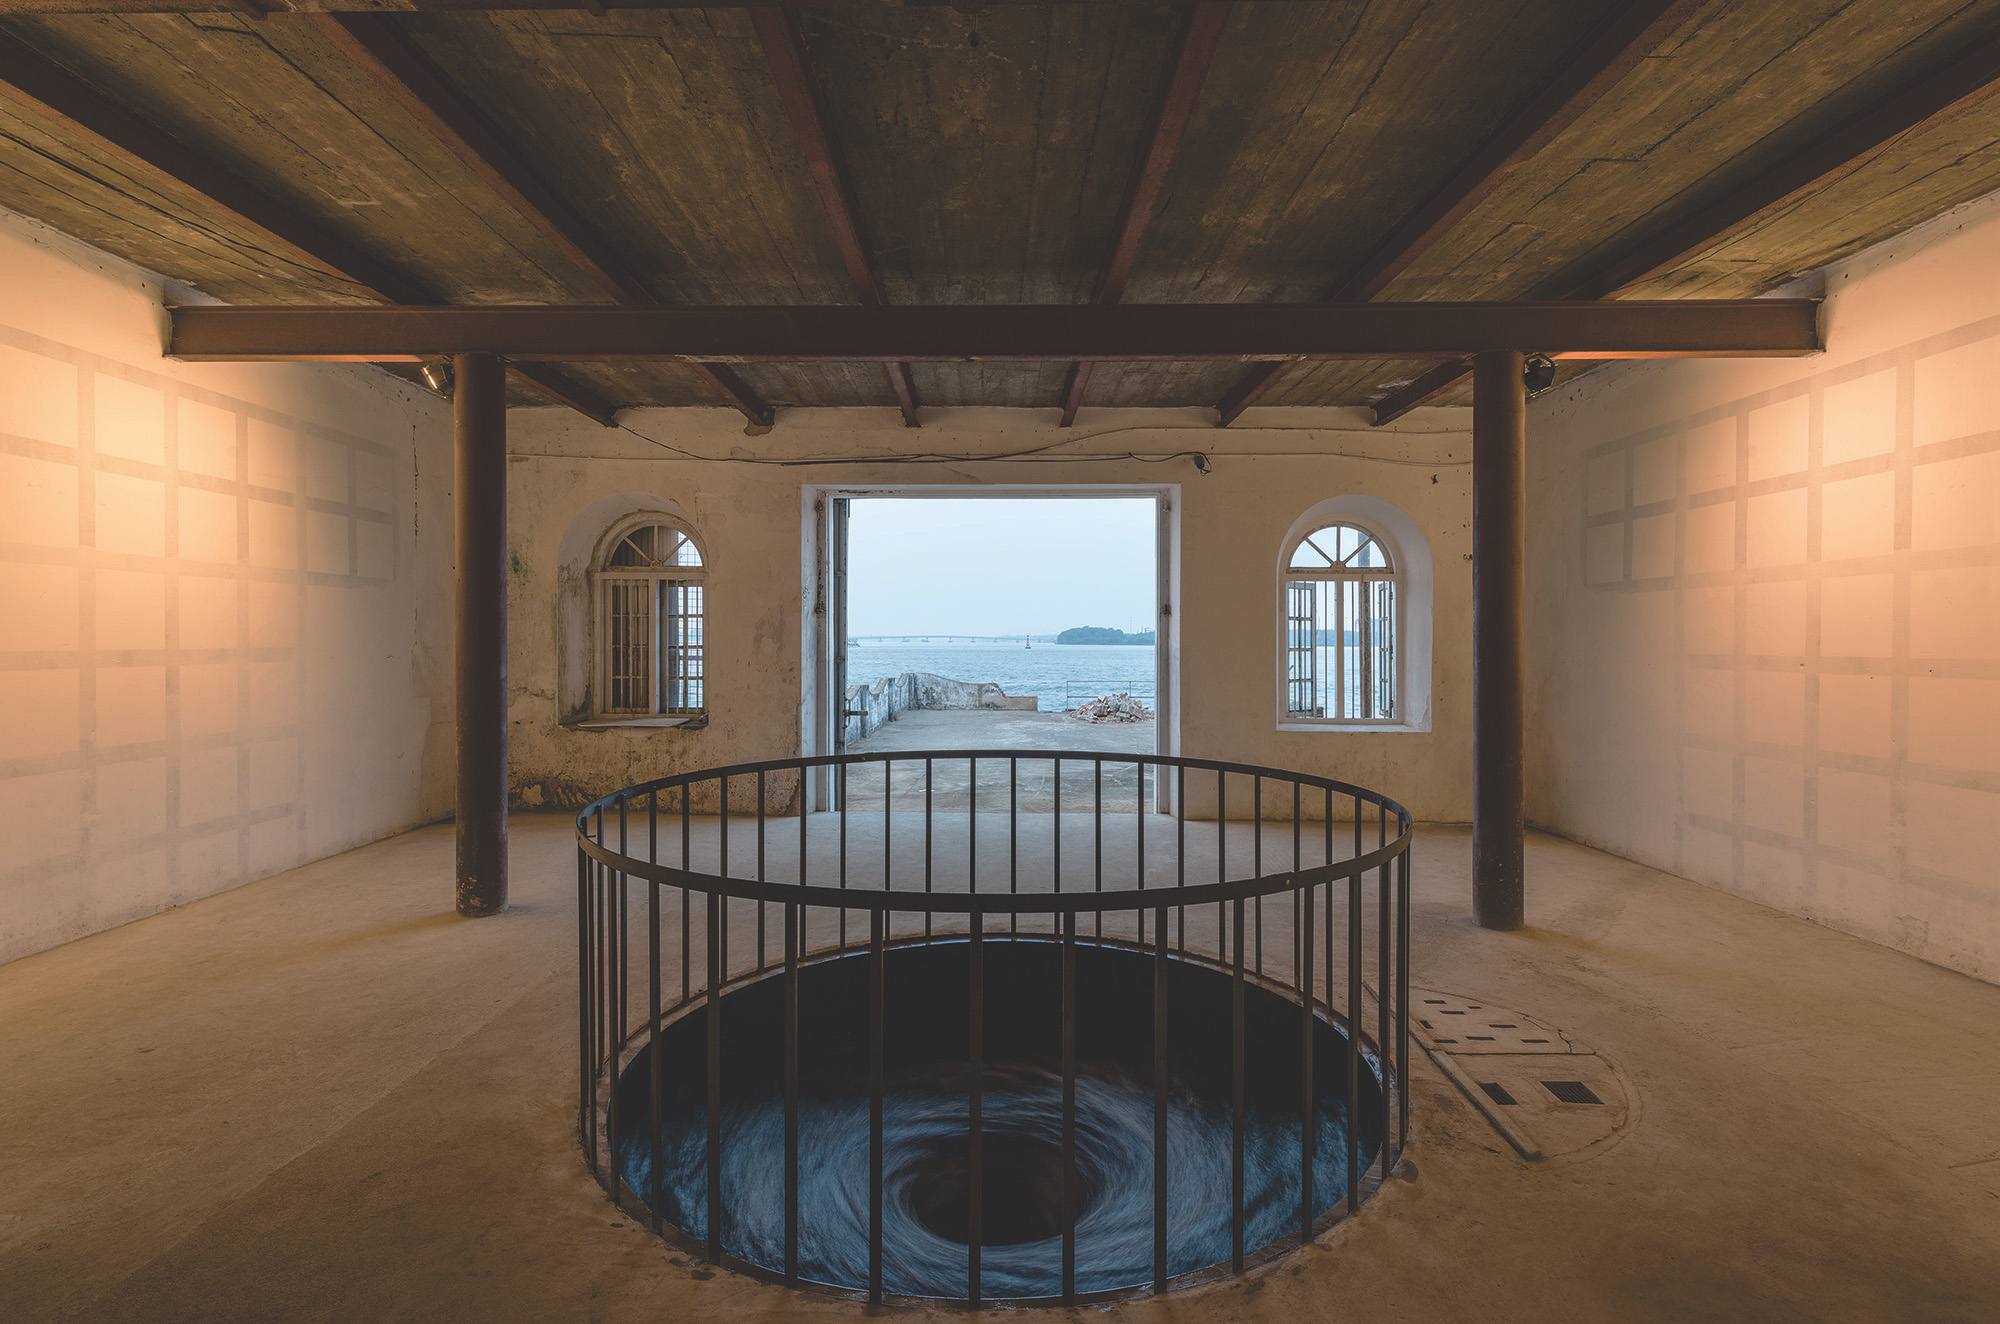 Anish Kapoor, ''Descension,'' 2014. Metallic container and water. Dimensions variable. Installation view at Aspinwall House, Fort Kochi.